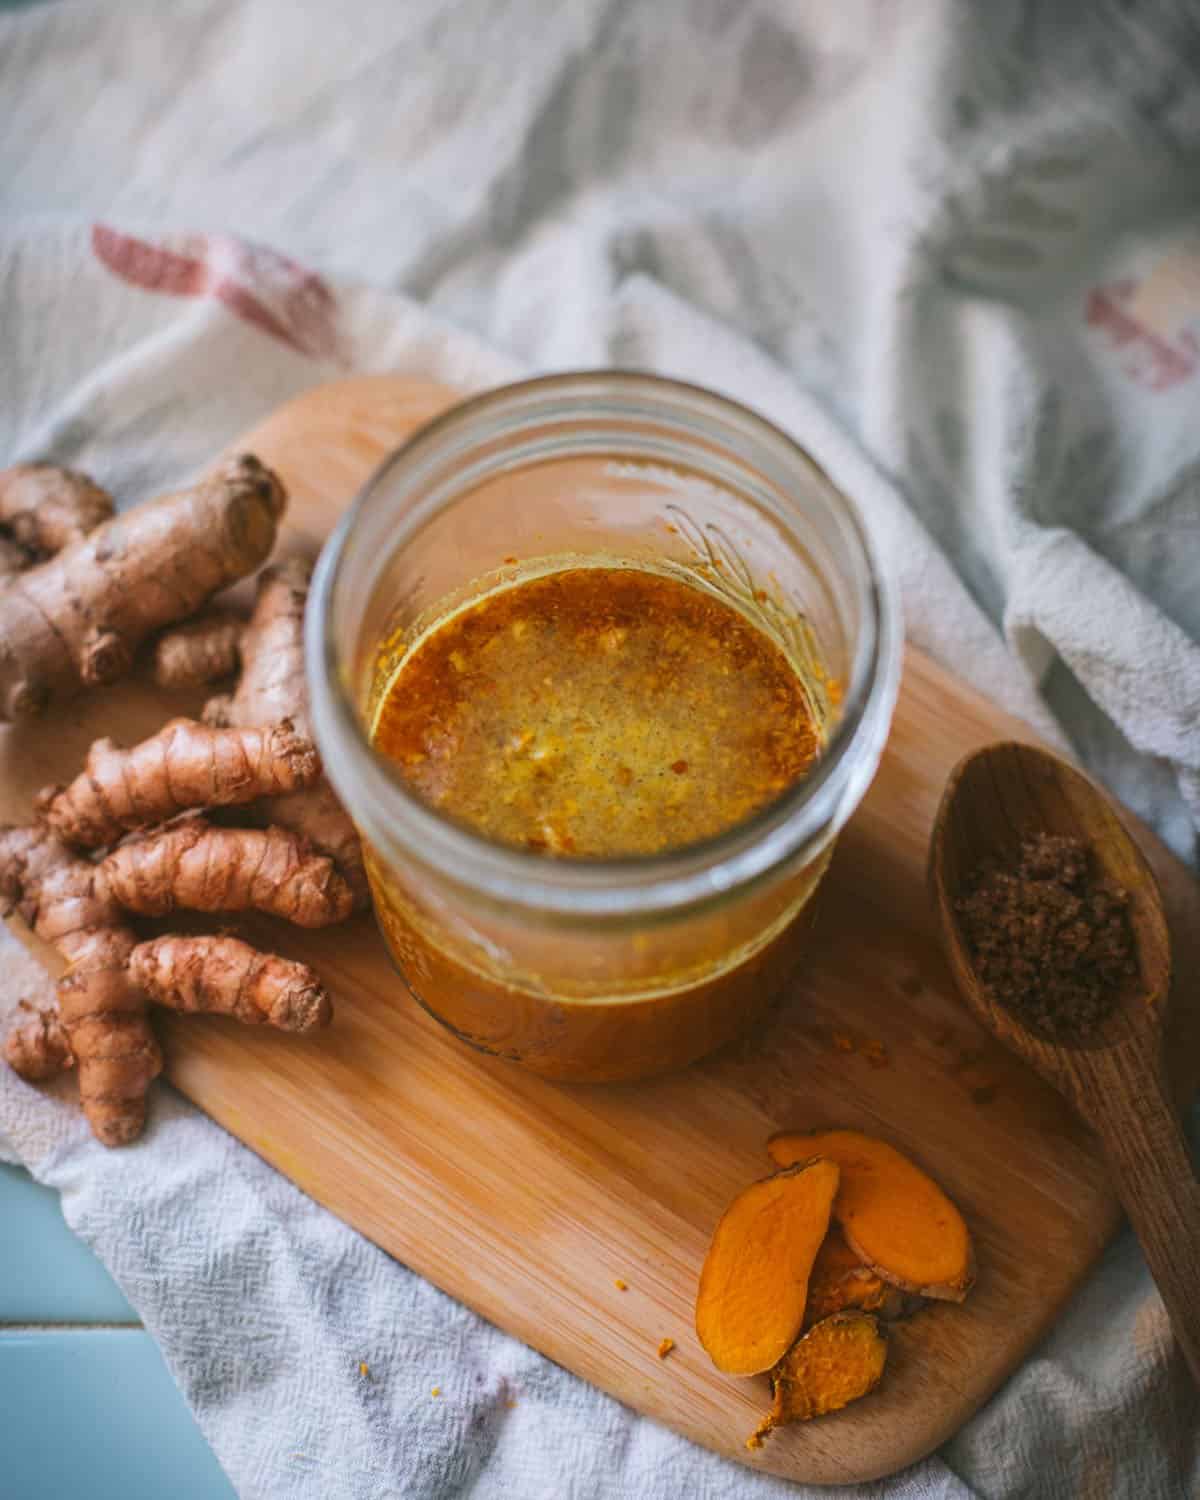 a jar of turmeric bug with bubbles on the surface